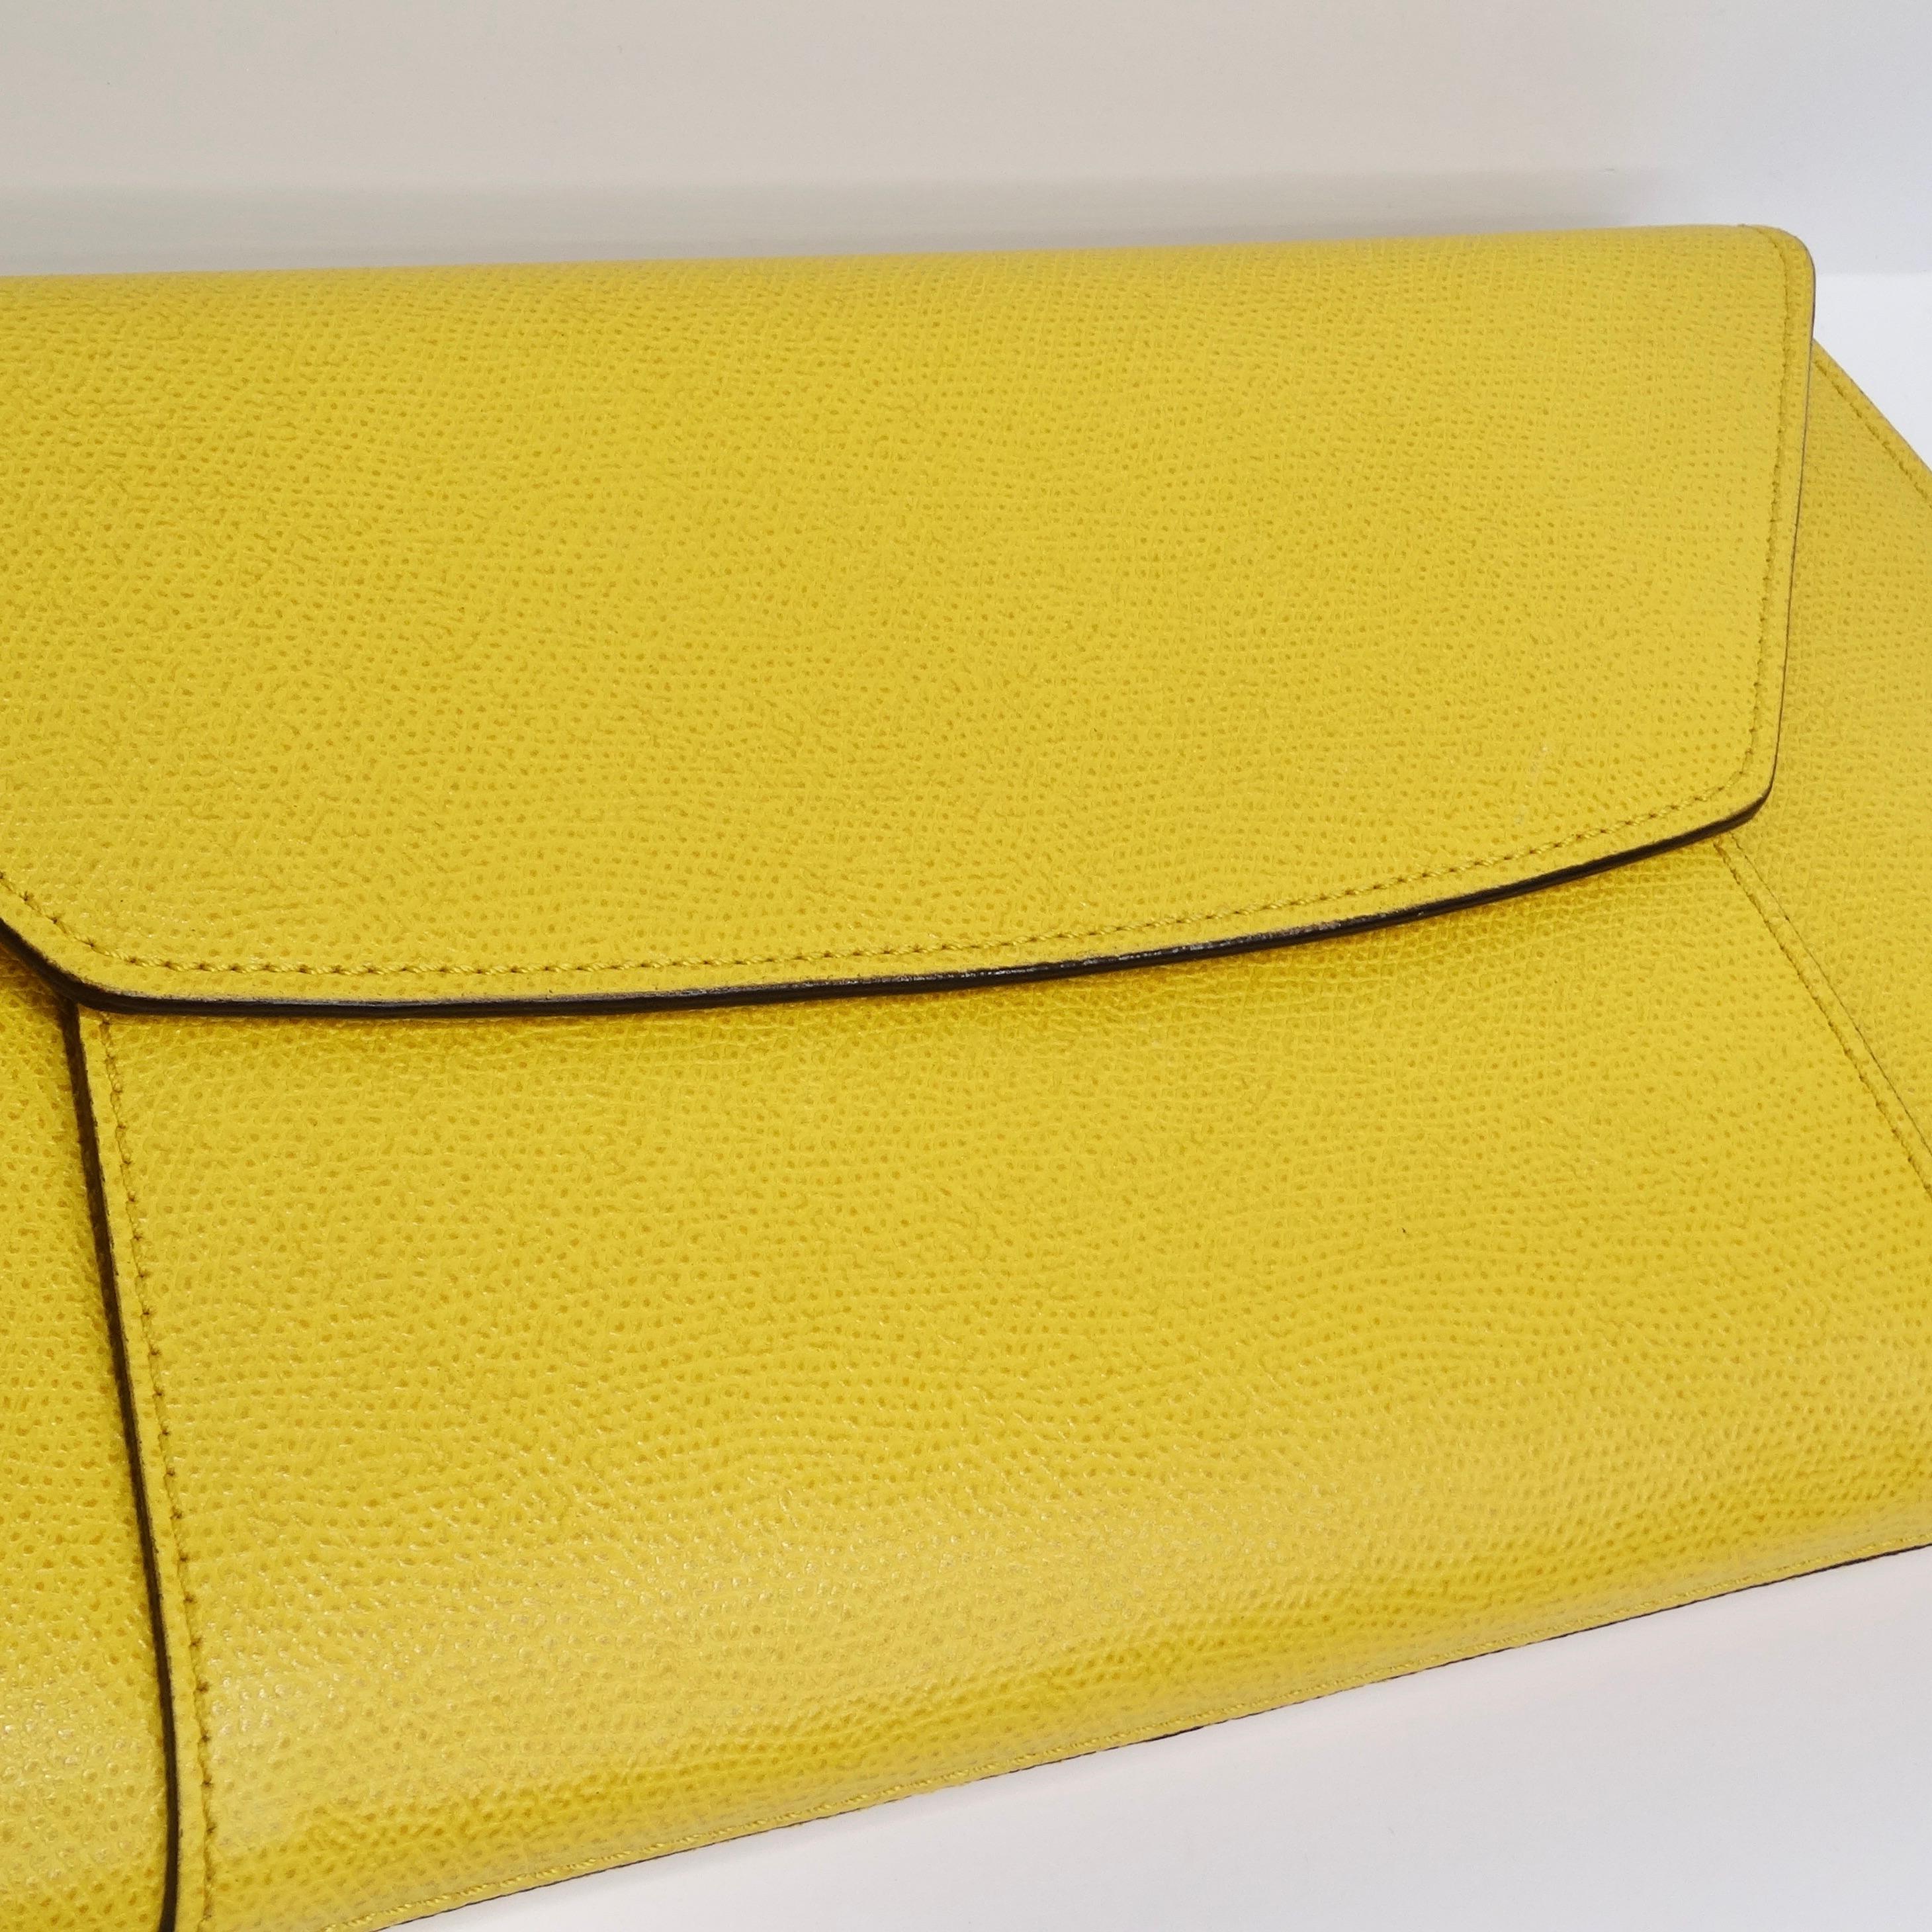 Valextra Yellow Leather Clutch For Sale 2